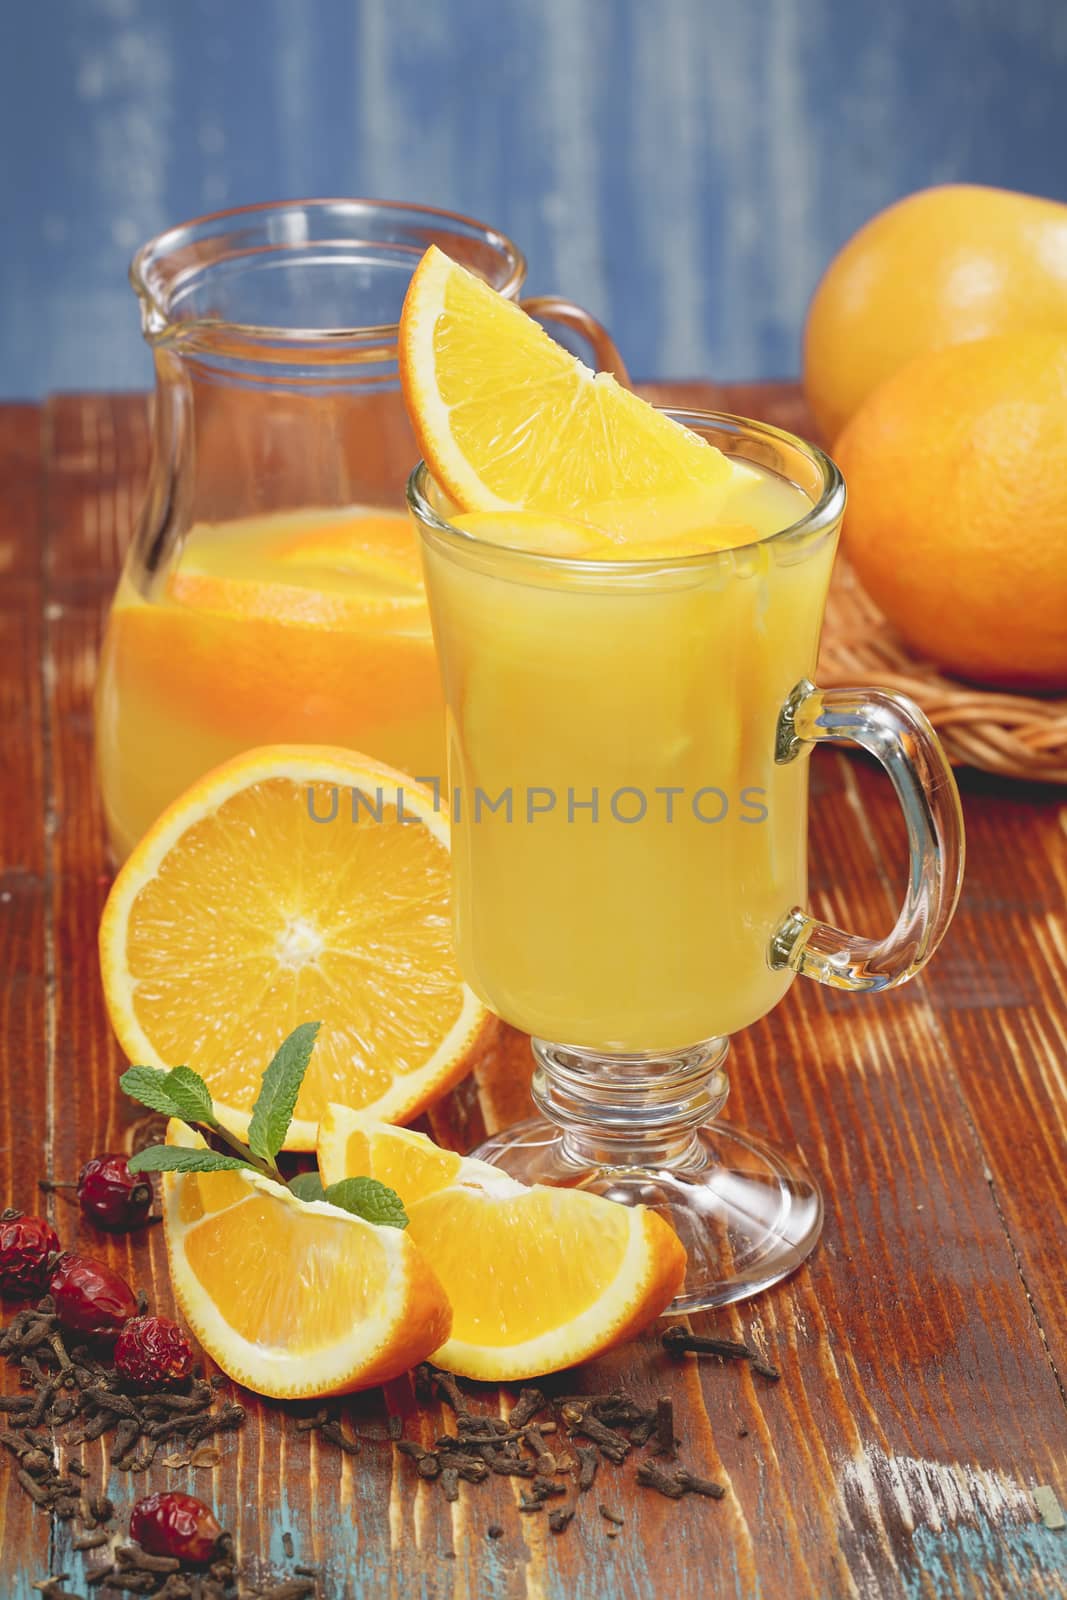 Orange juice and fresh oranges over rustic background. A macro photograph, shallow depth of field